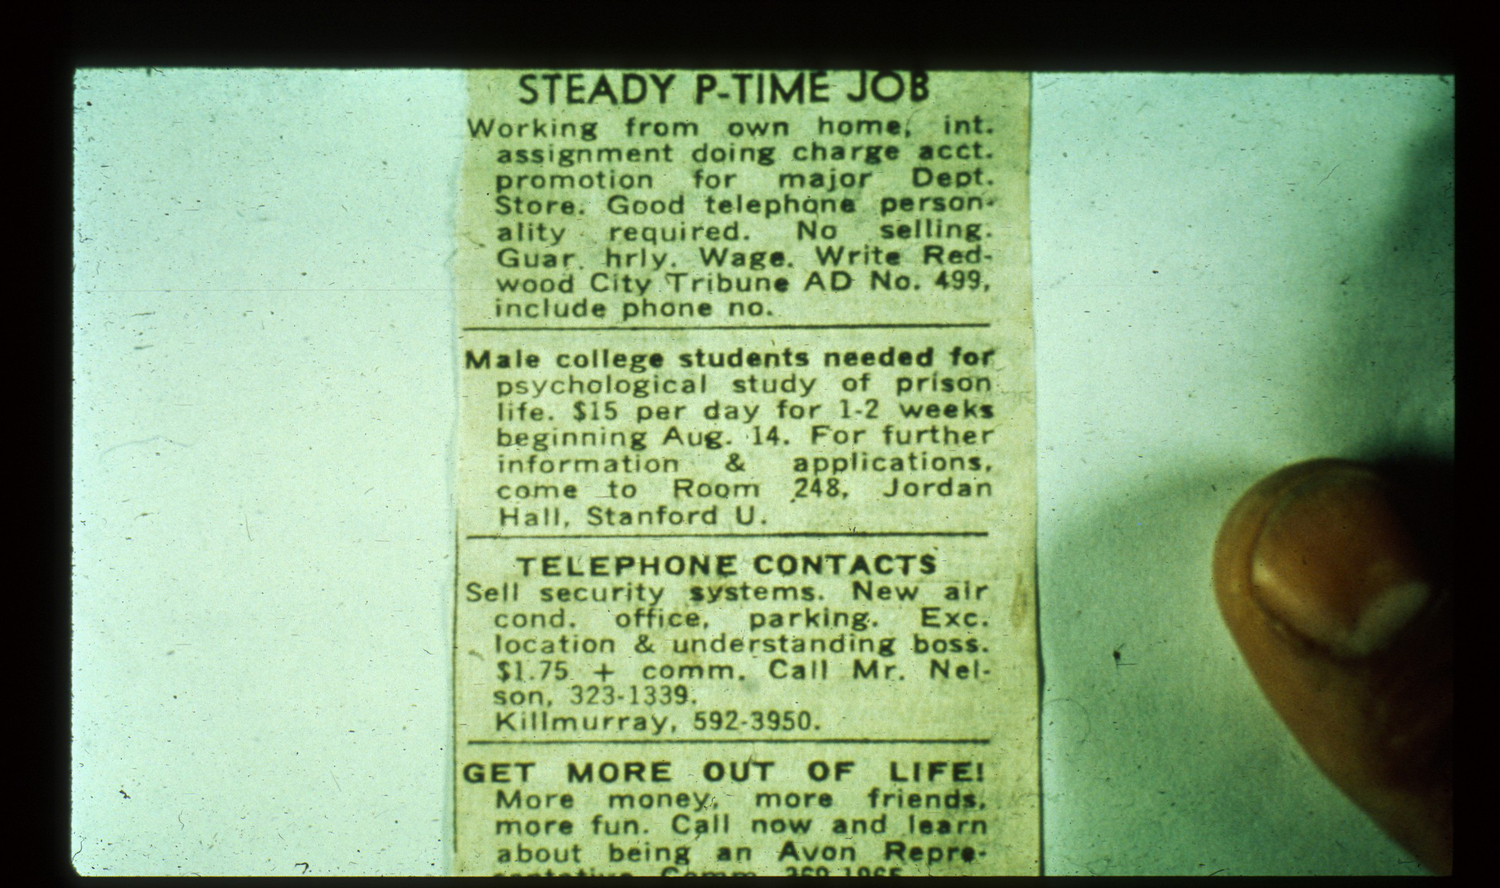 Clipping of a newspaper ad asking for study participants in the Stanford Prison Experiment.